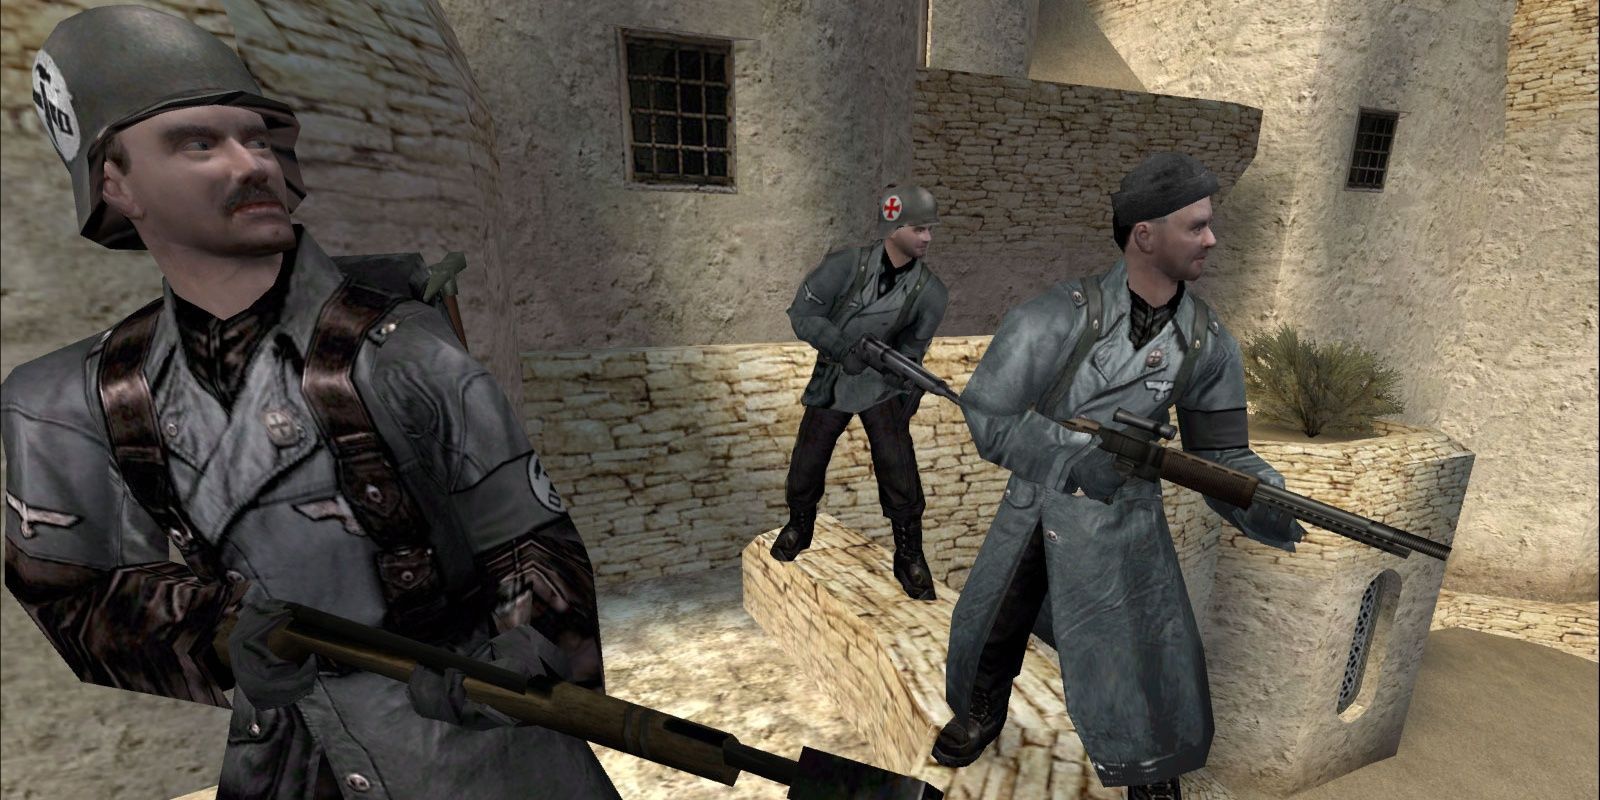 Three soldiers looking to the right while grabbing a rifle.